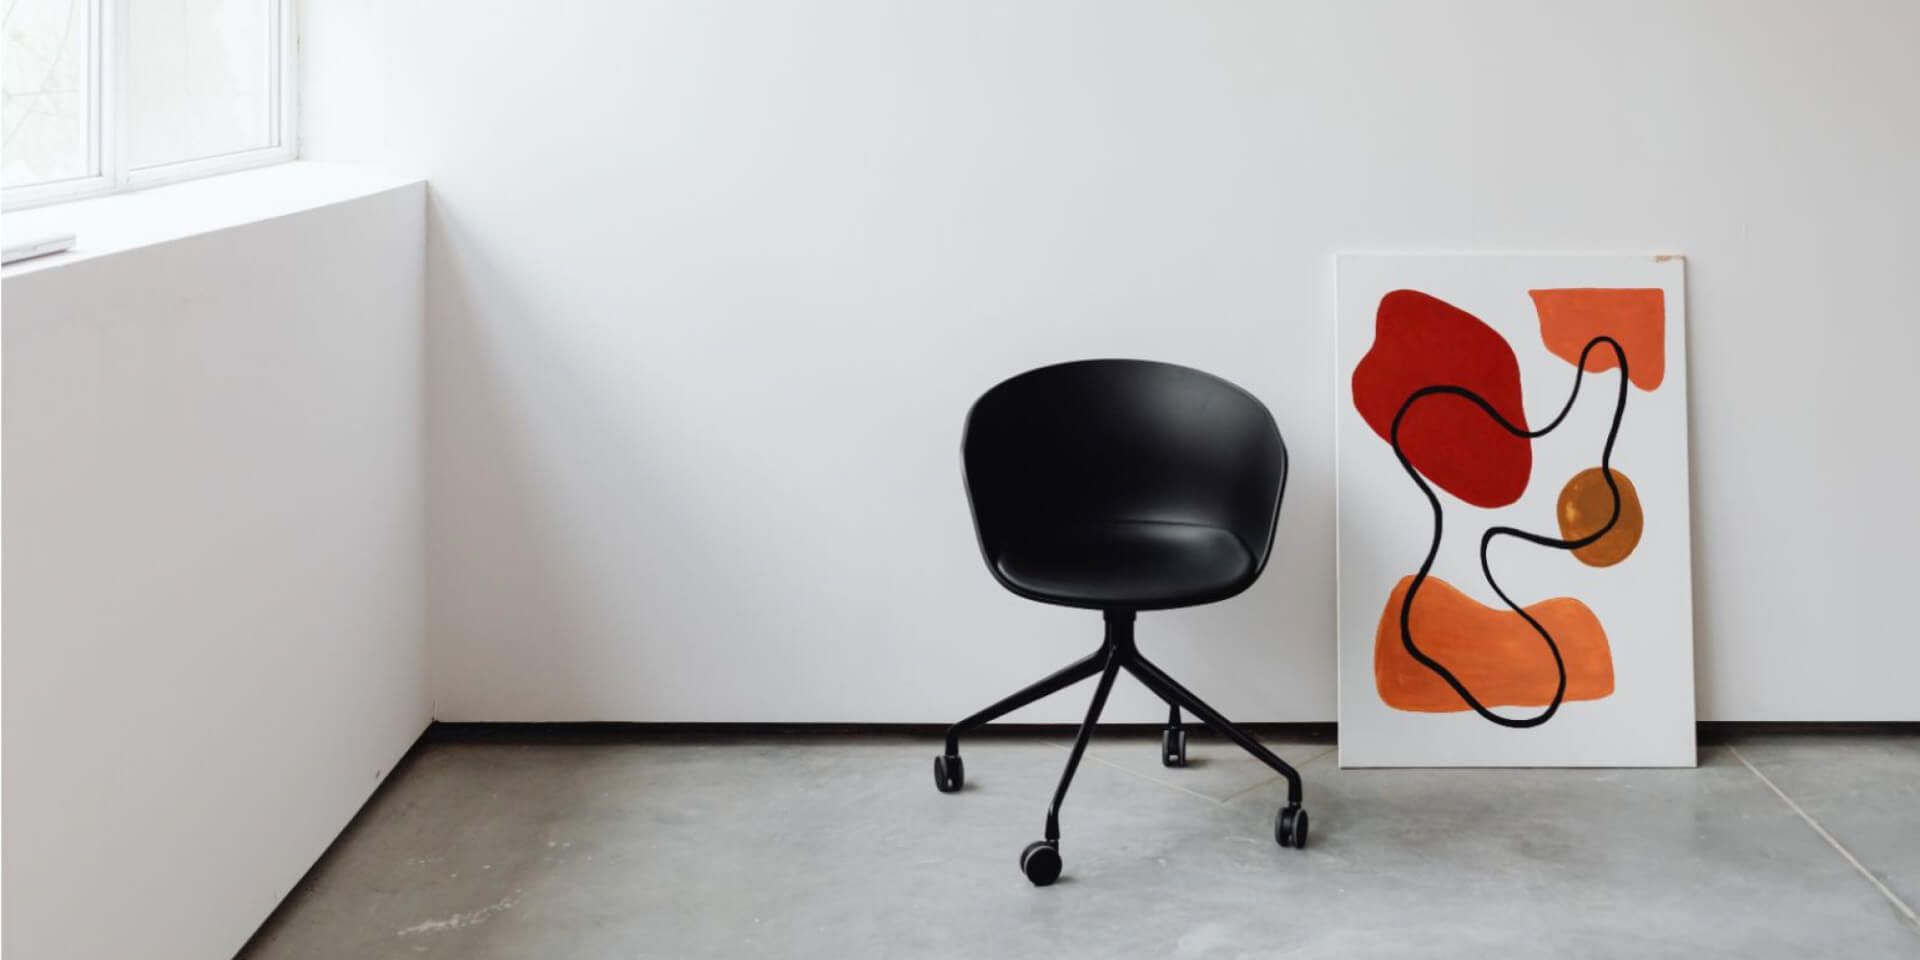 Can a Rolling Chair be a Clinical Tool? A photo of a rolling chair next to a piece of abstract art.